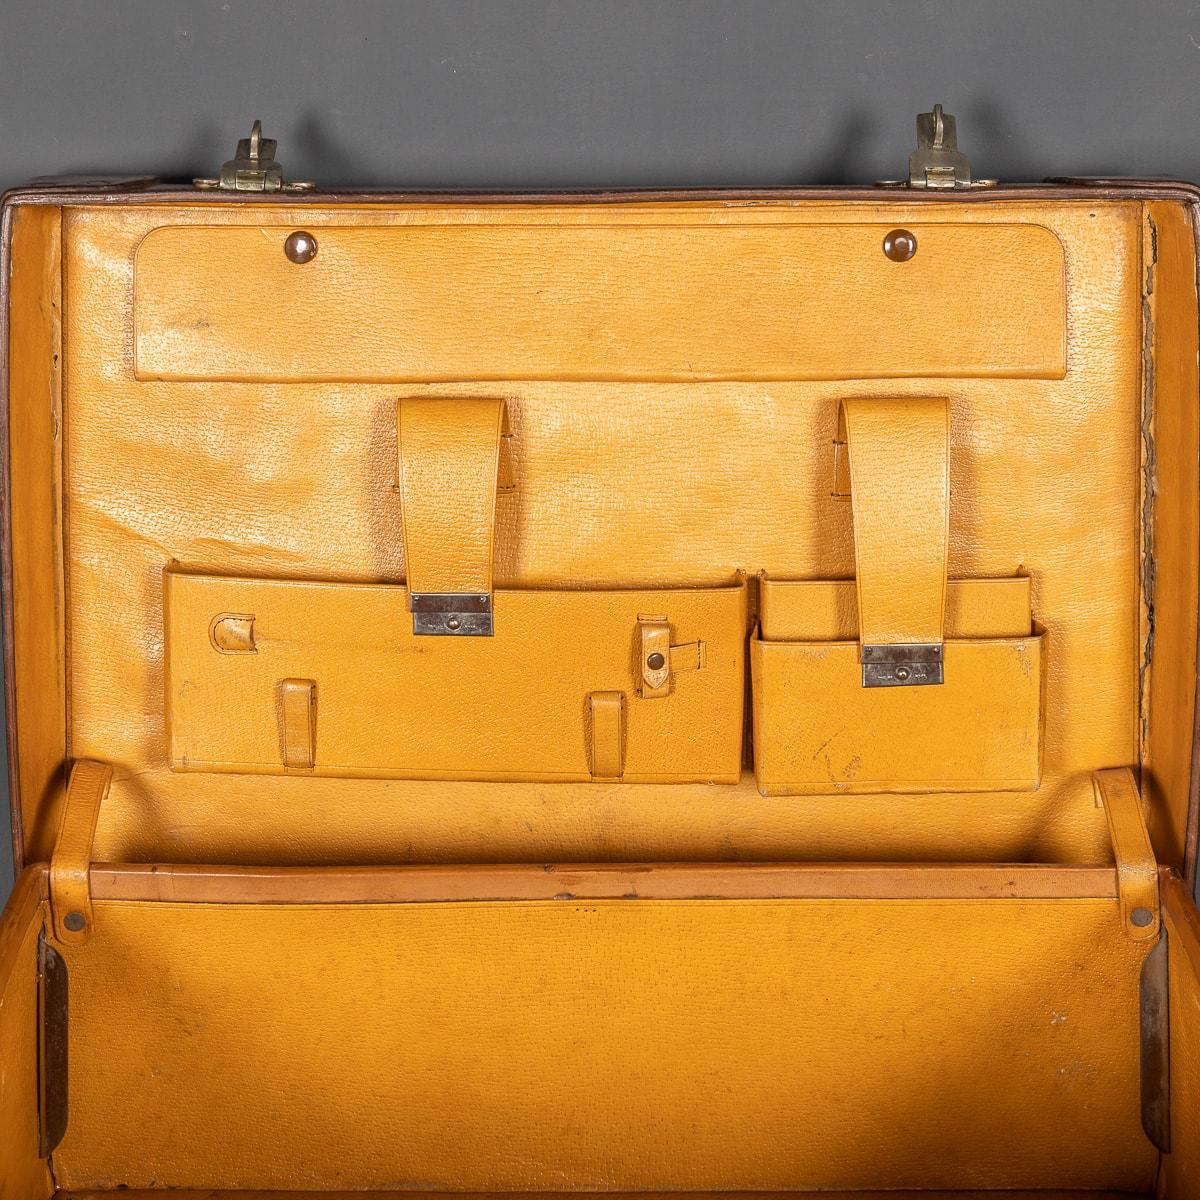 20th Century British Made Bridle Leather Suitcase, c.1910 For Sale 6